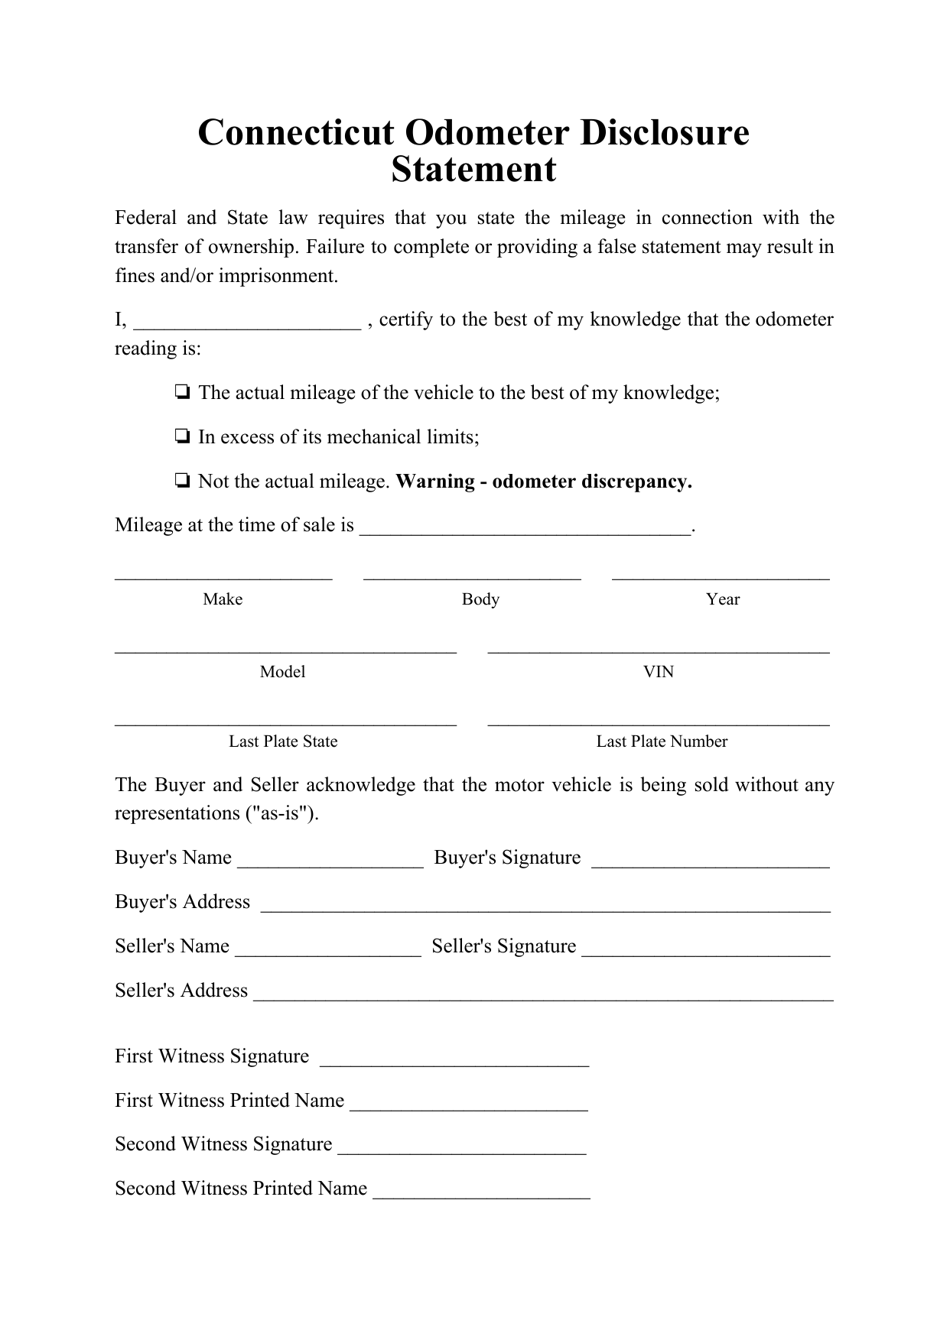 Odometer Disclosure Statement Form - Connecticut, Page 1